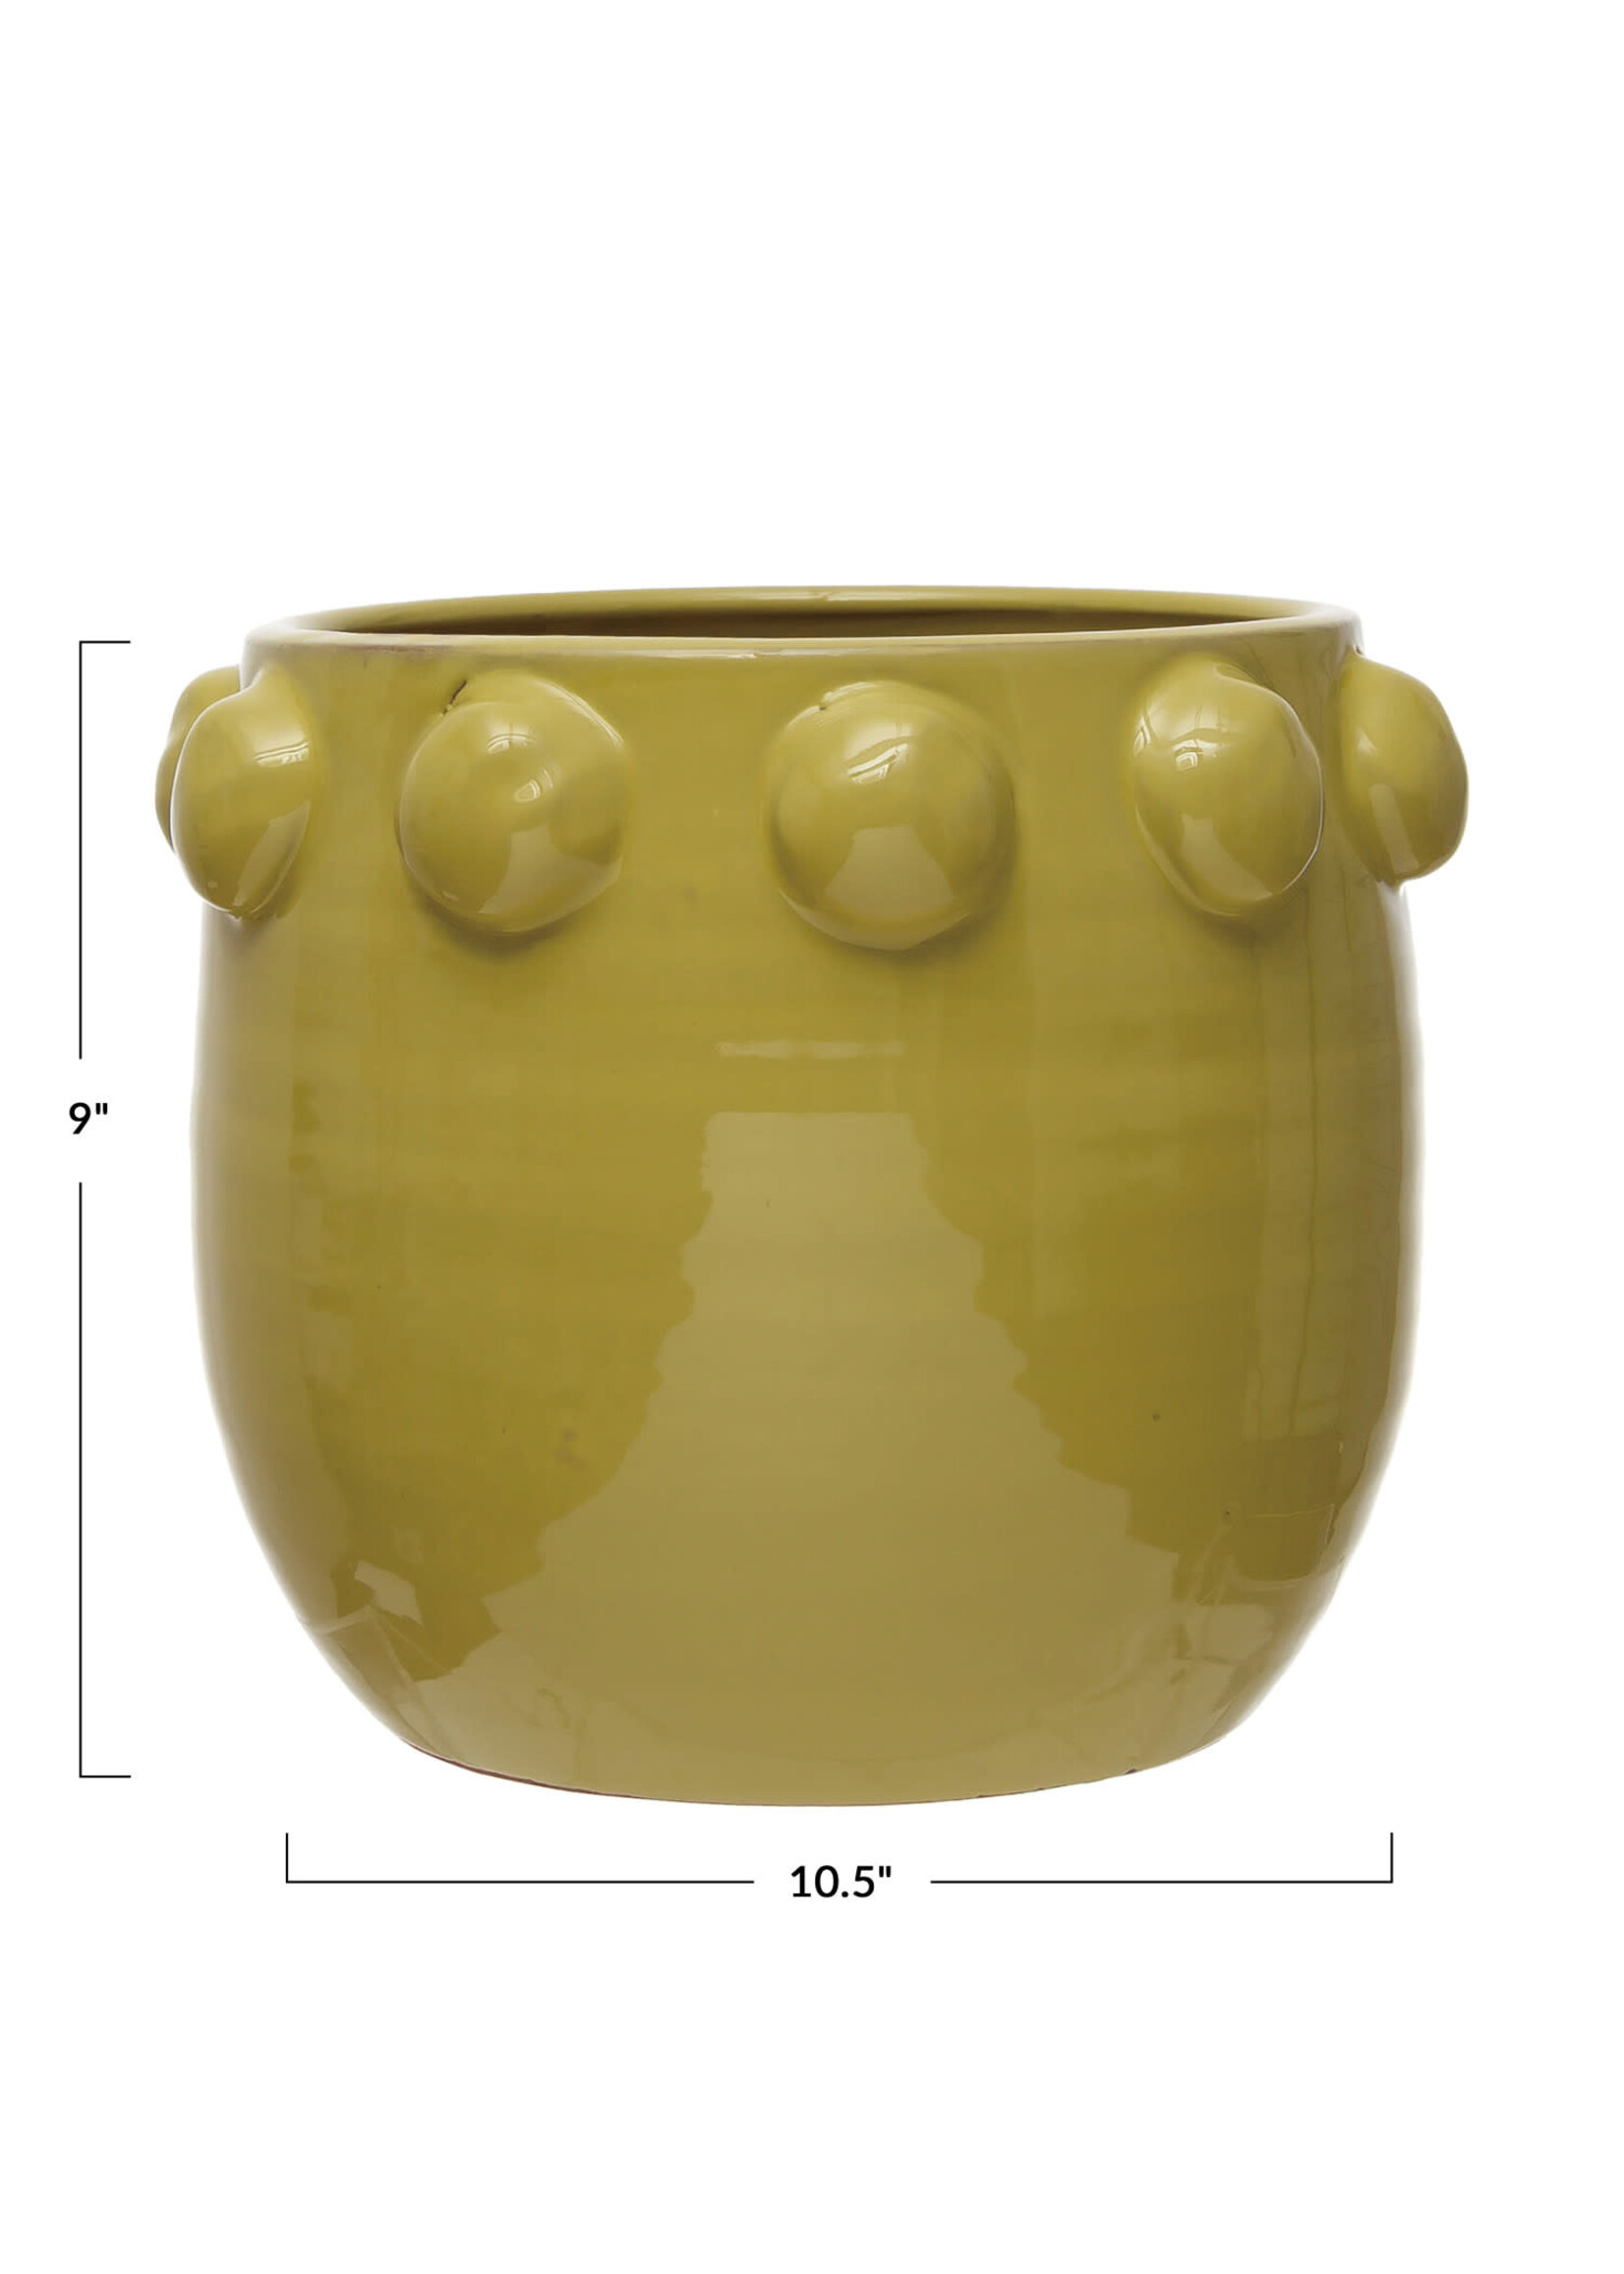 Terra-cotta Planter with Raised Dots (Spring Green)